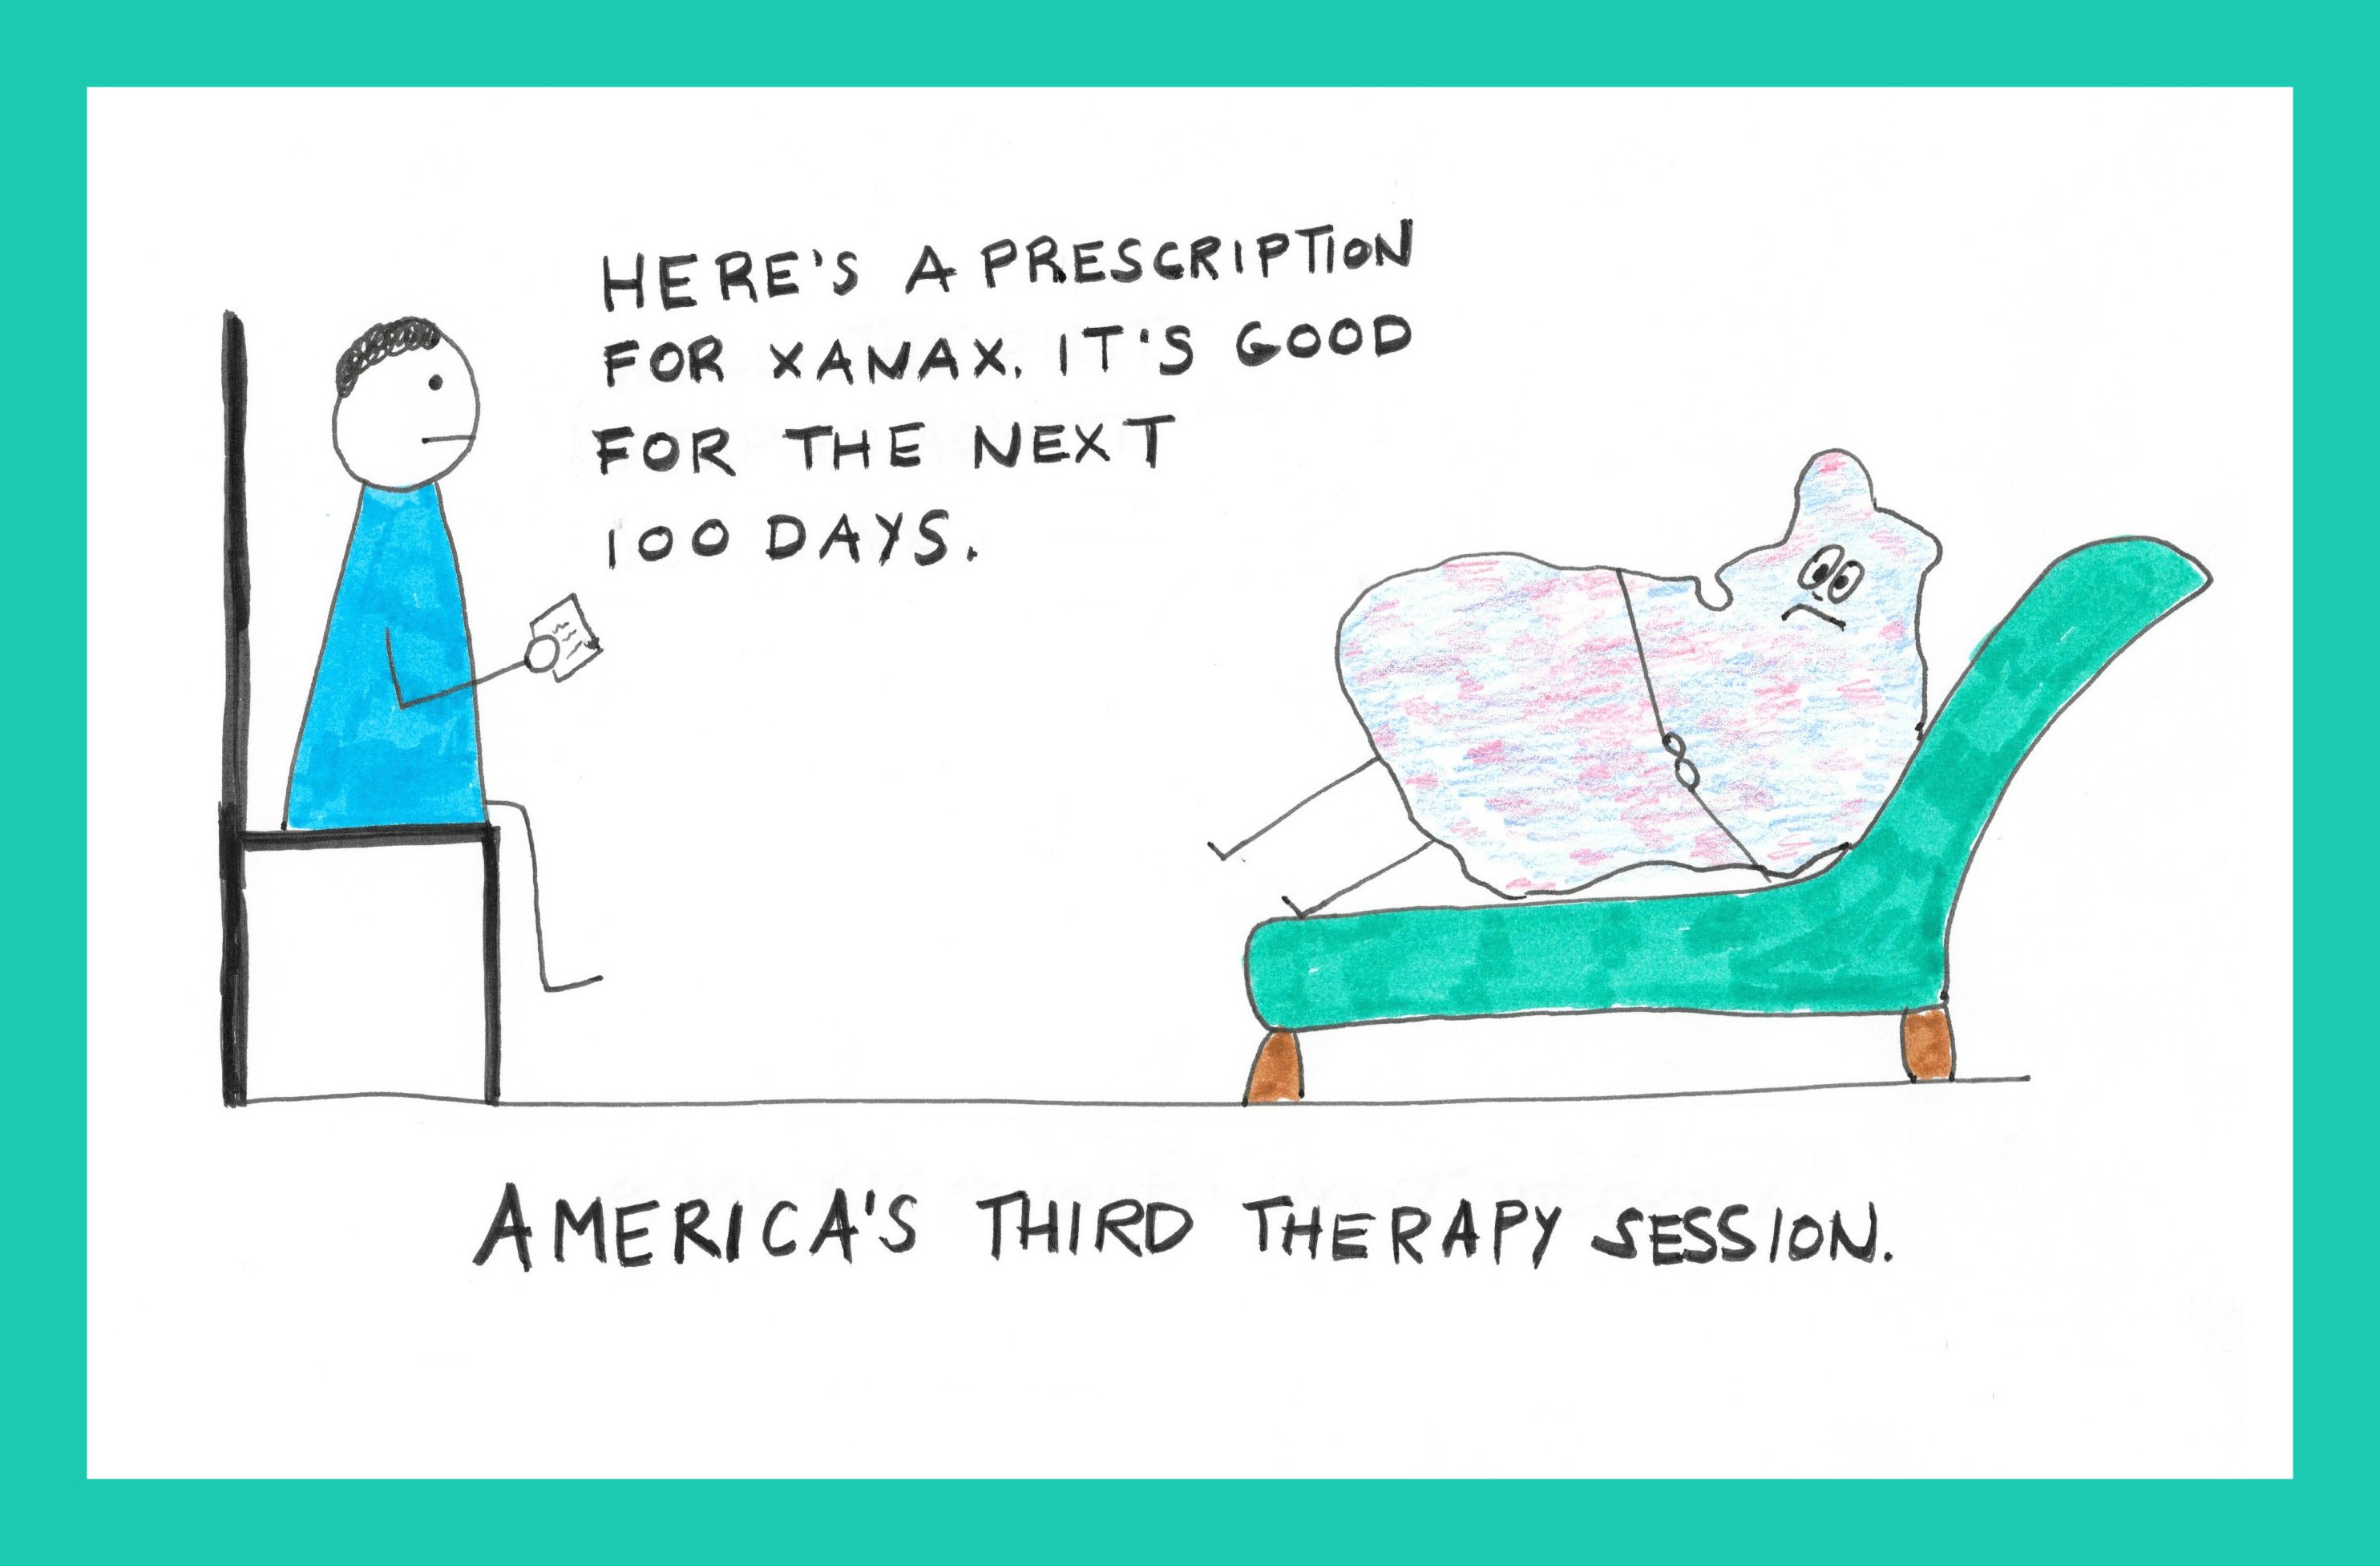 America's Third Therapy Session